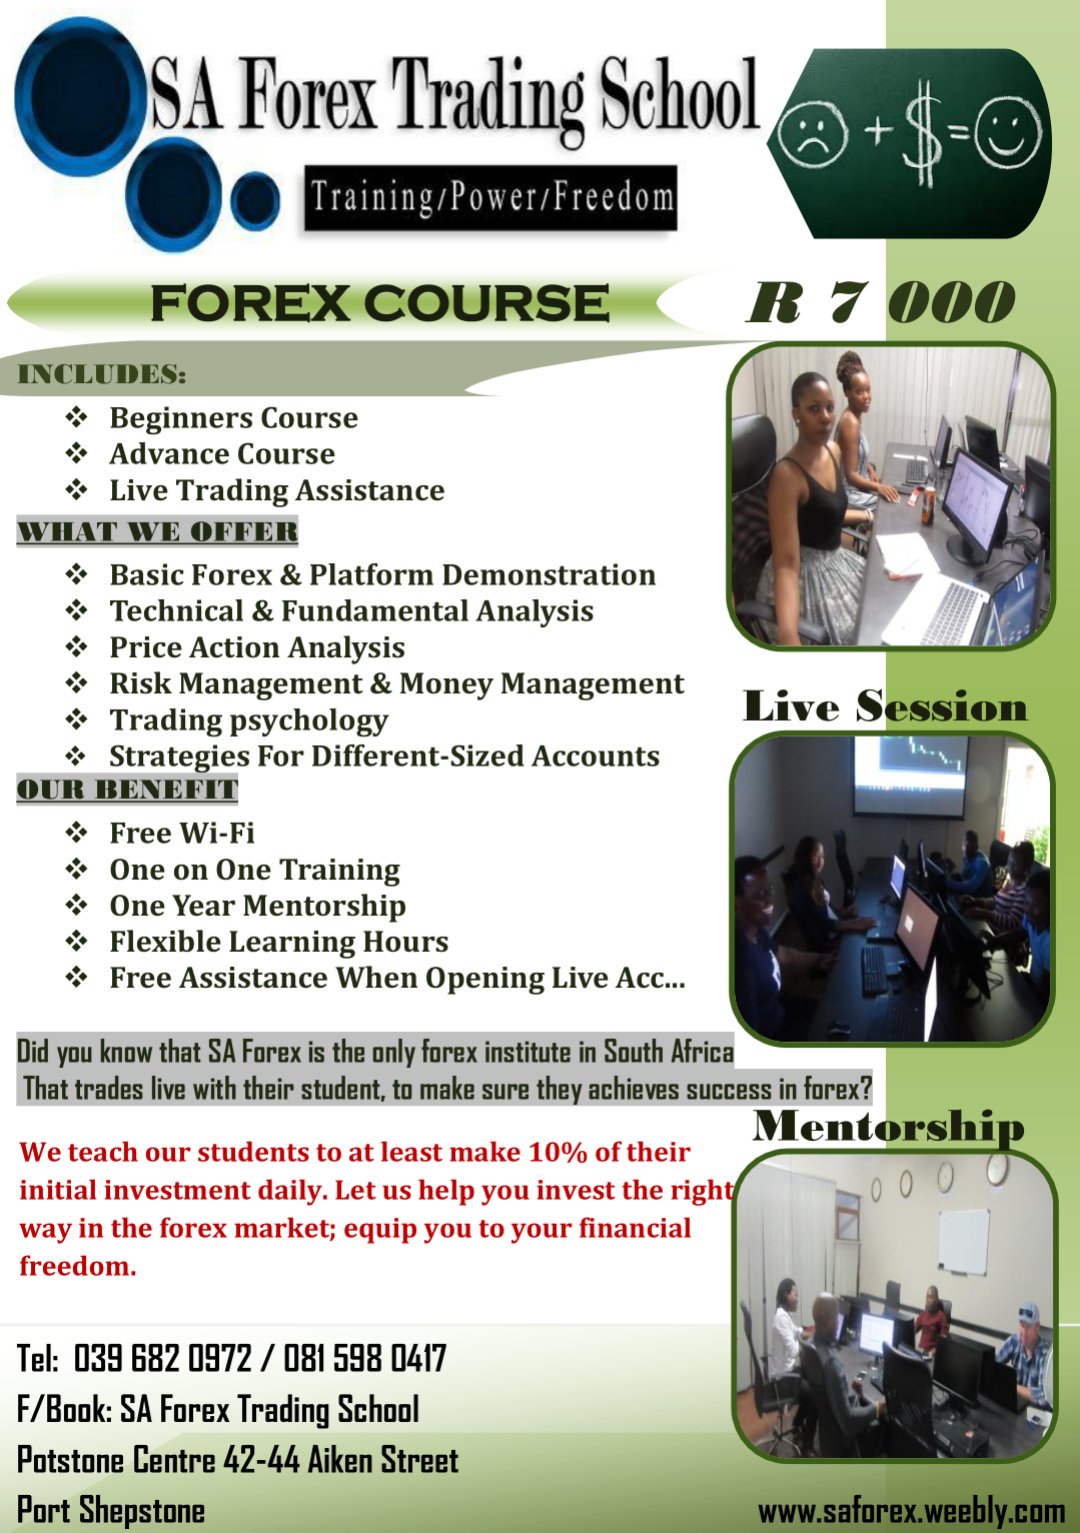 Sa Forex Trading On Twitter - 